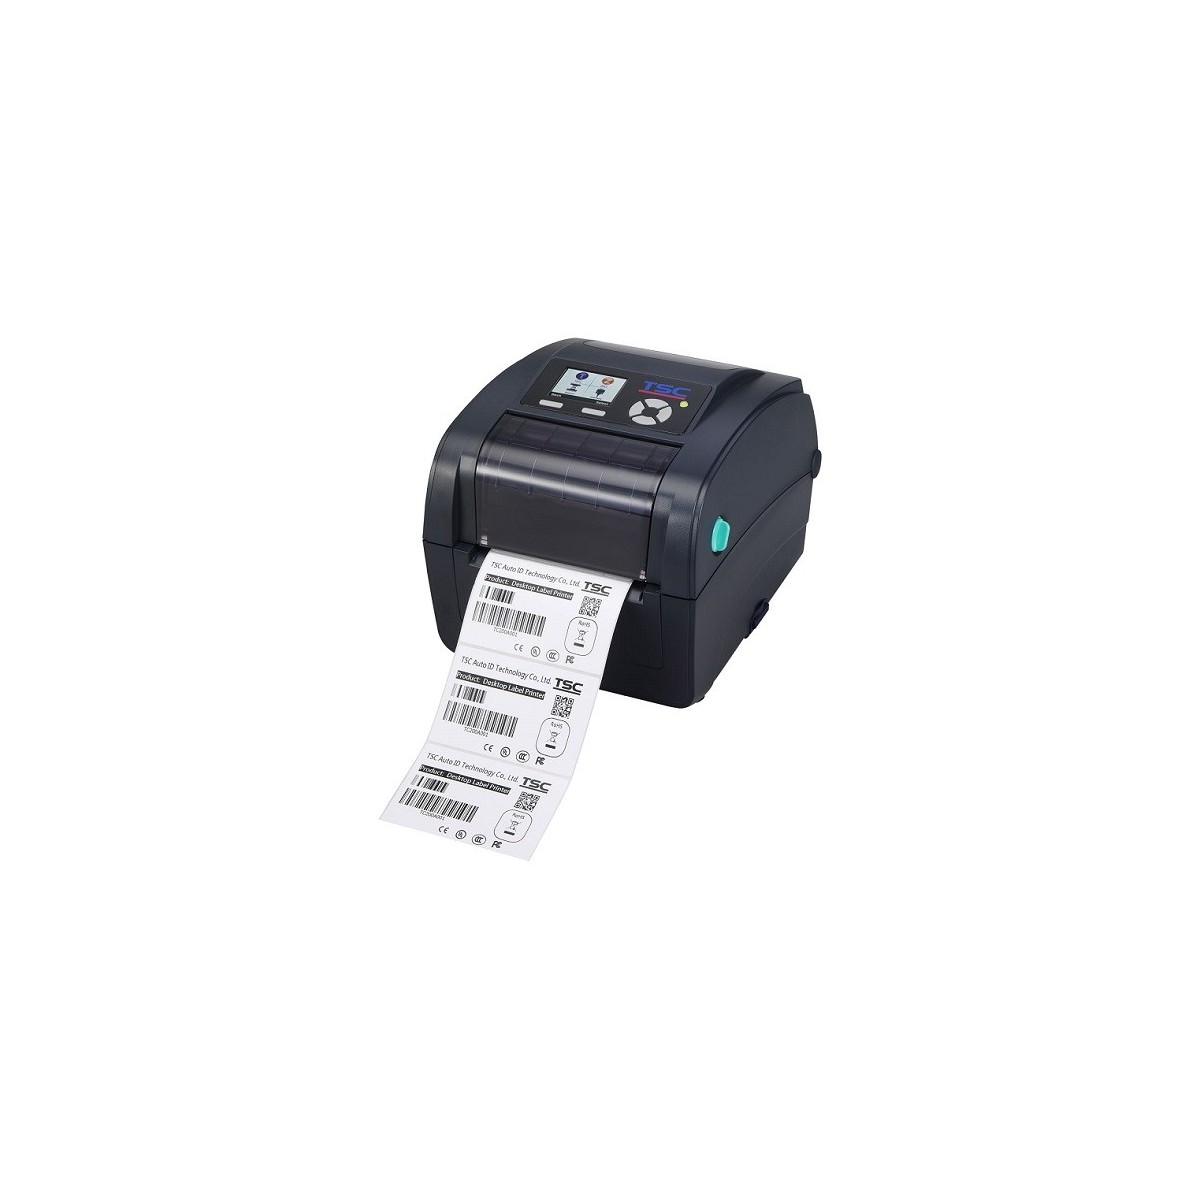 TSC TC210 - Direct thermal / Thermal transfer - 203 x 203 DPI - 152 mm/sec - Wired & Wireless - Navy